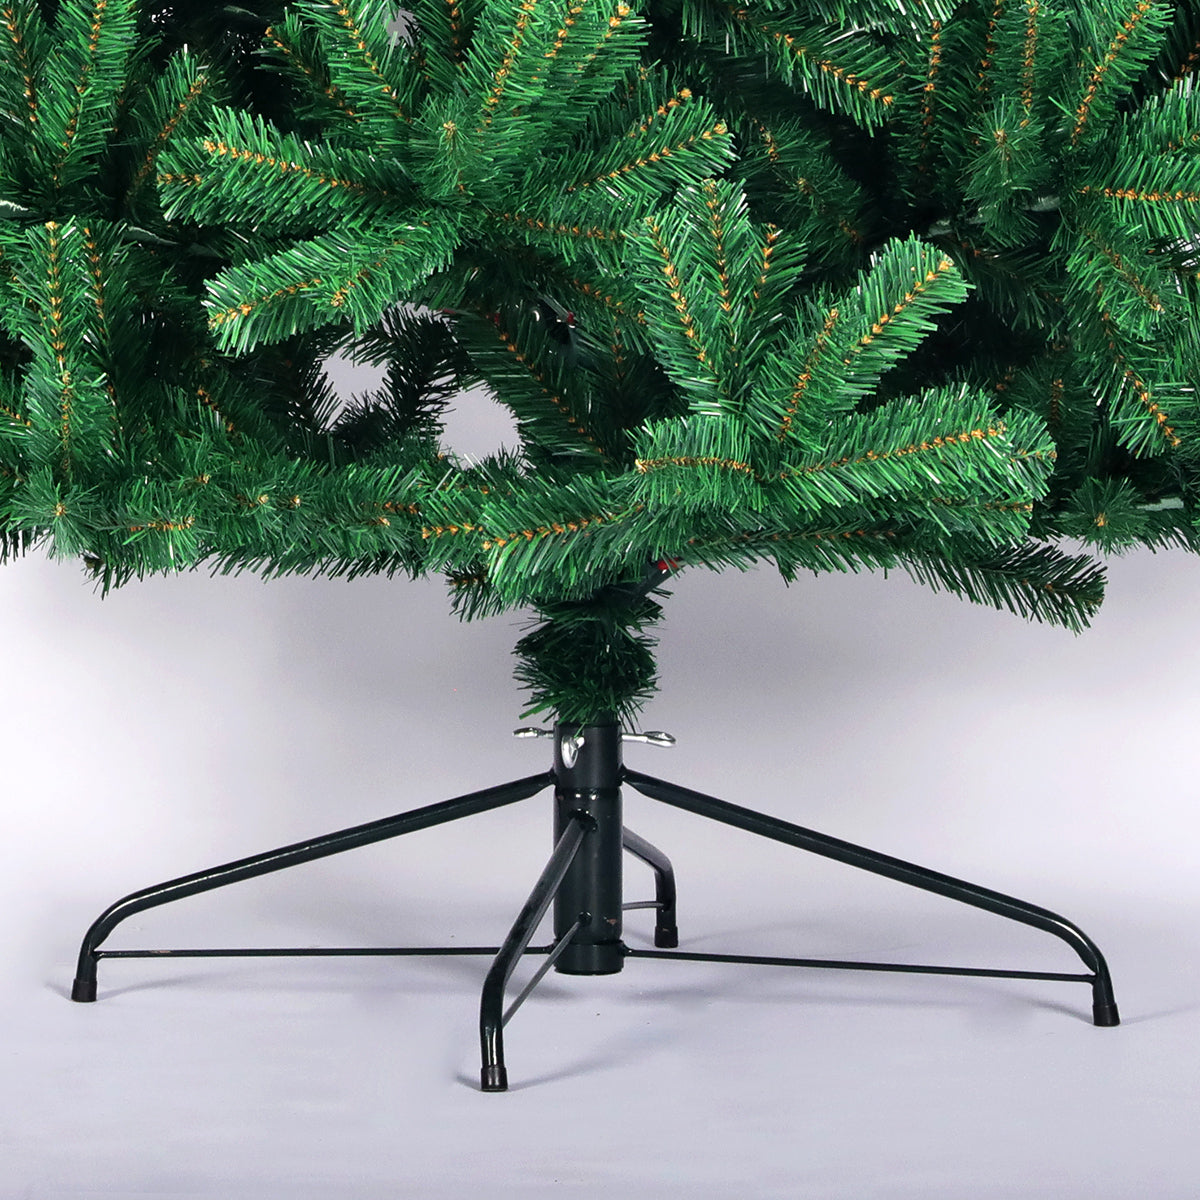 Artificial Christmas Tree Full Natural Spruce PVC Fir Tree 7.5ft Foldable Metal Stand Unlit Green